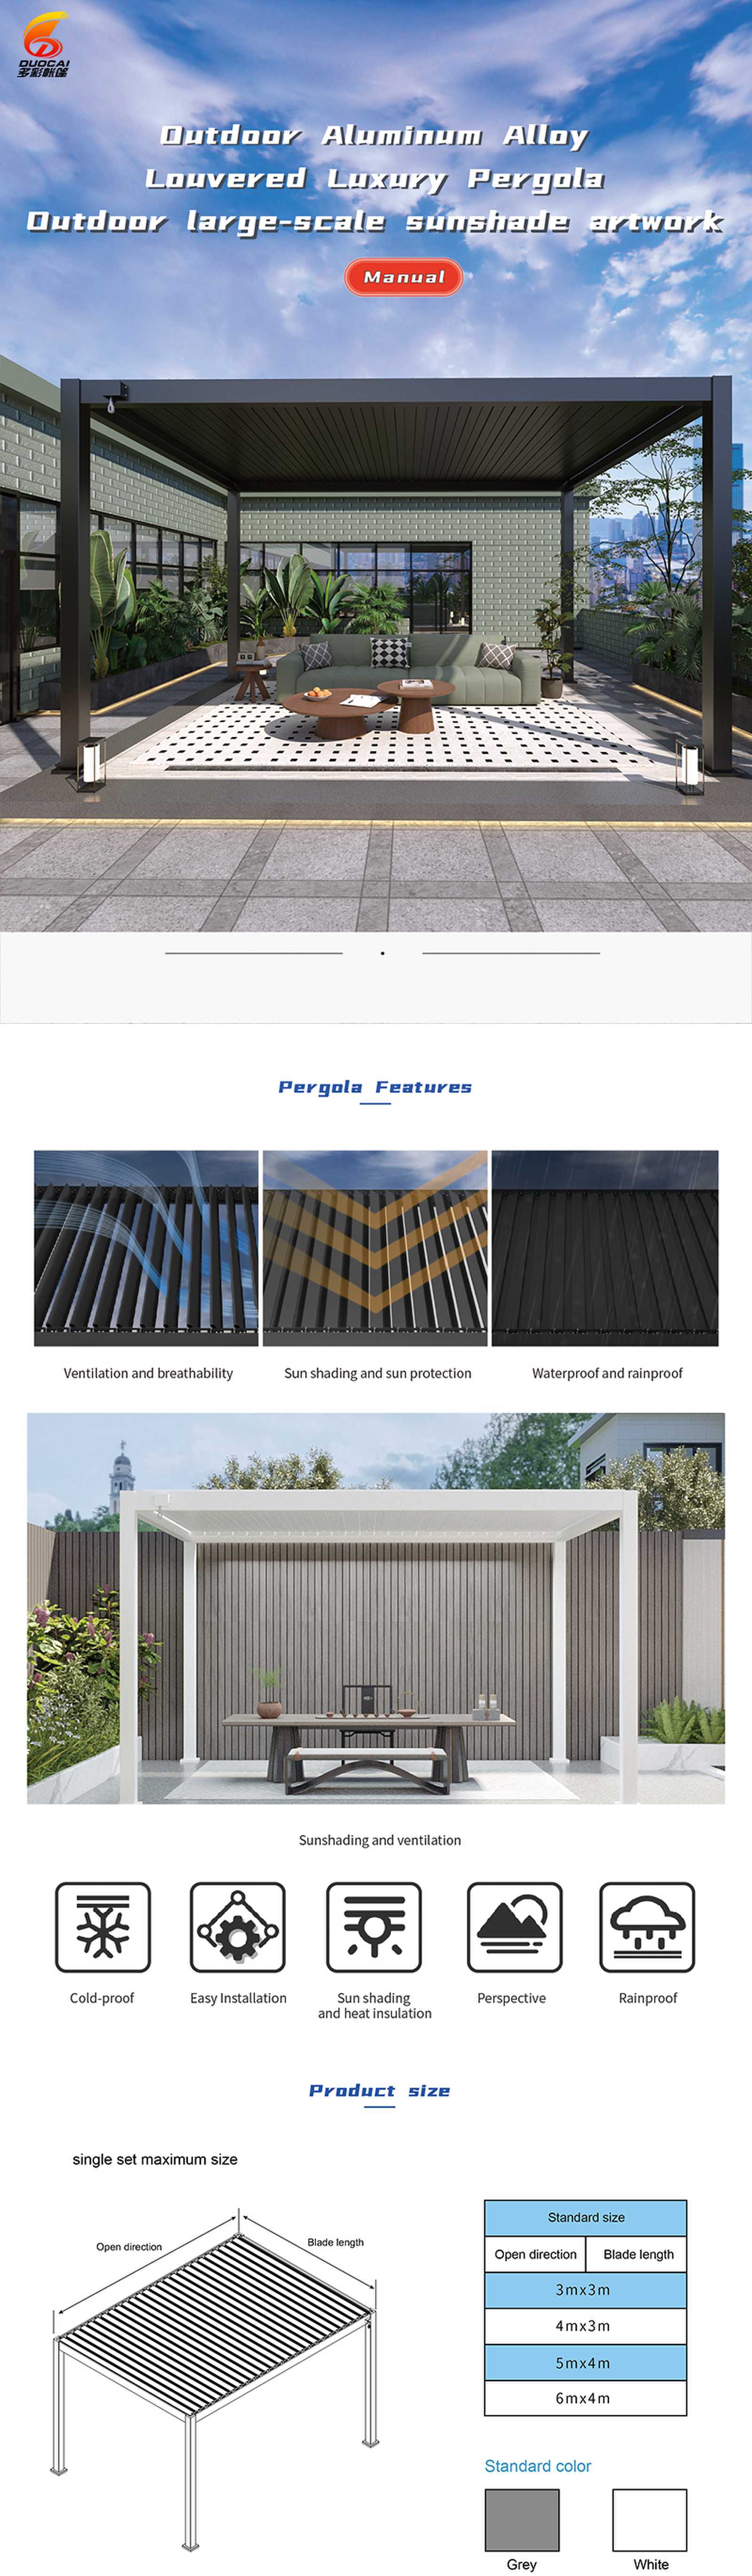 uvered Pergolas with Ventilation and breathability